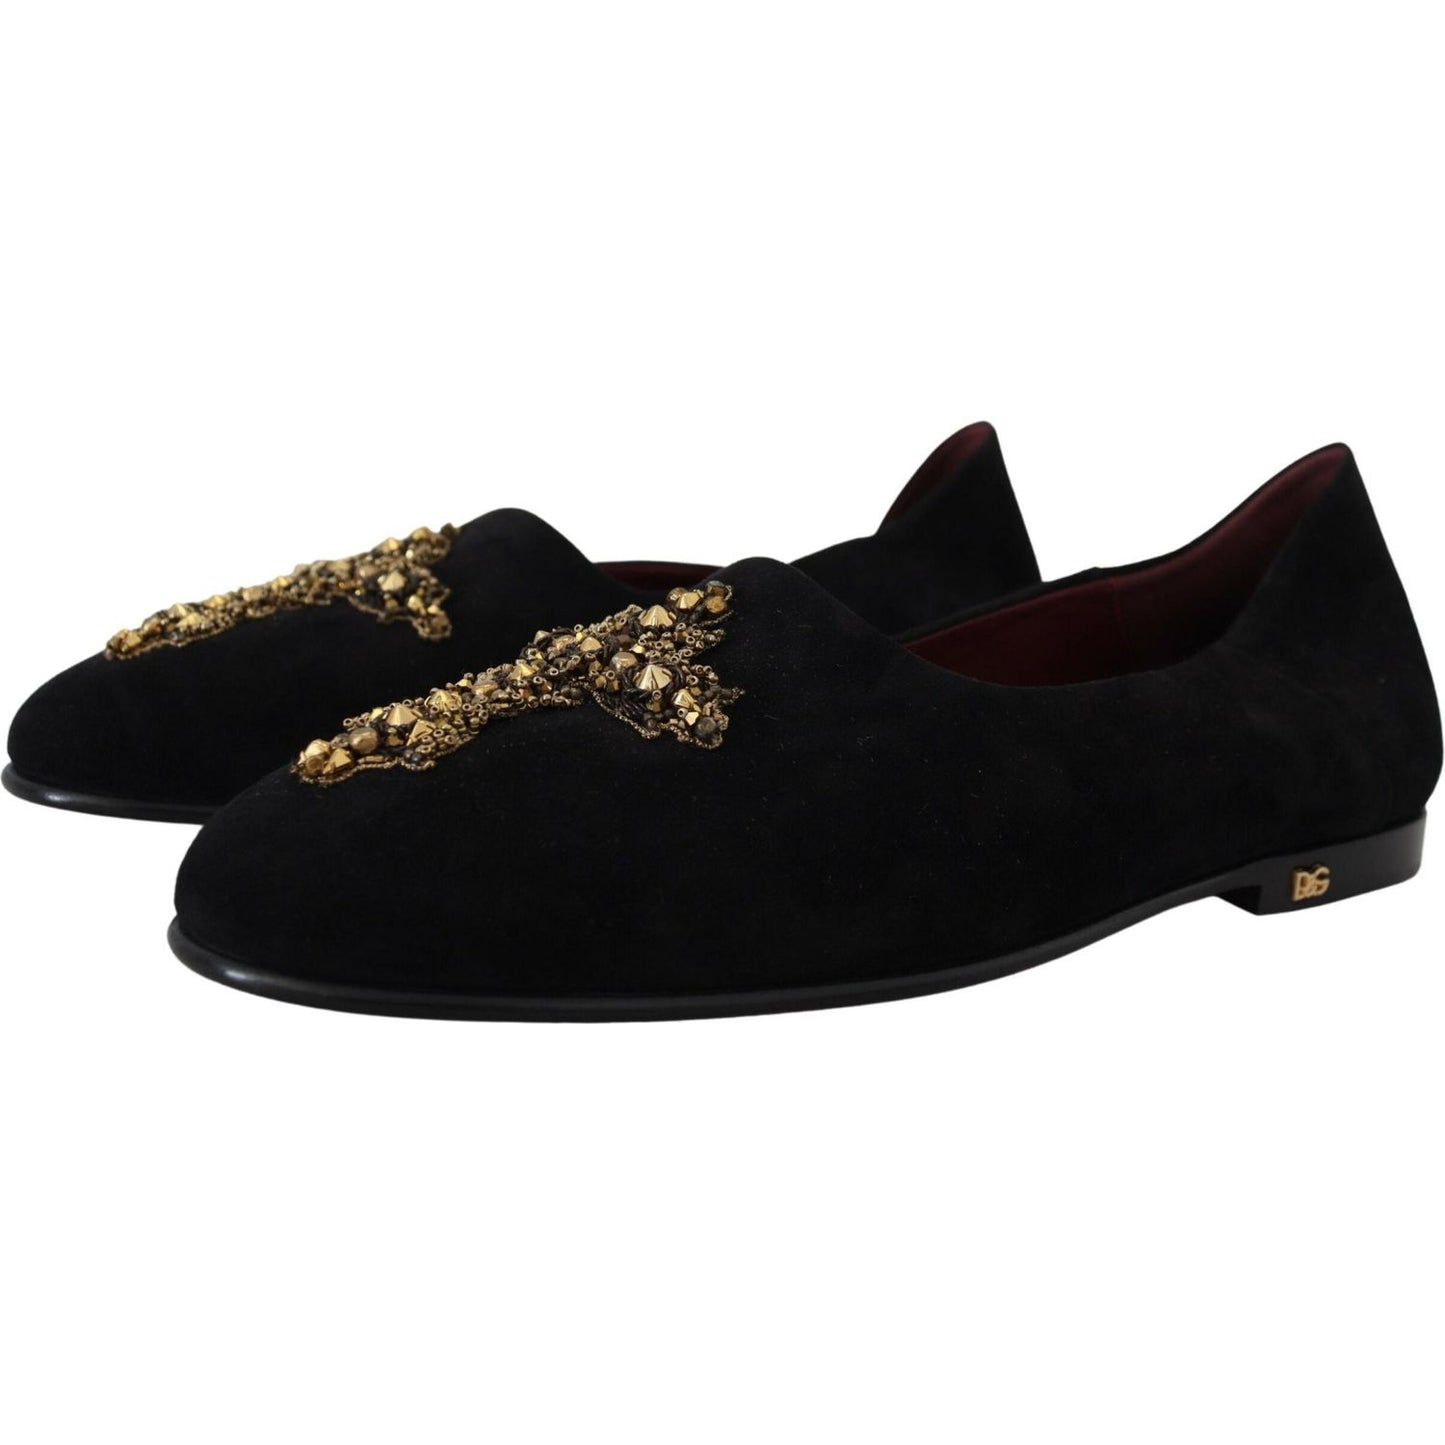 Dolce & Gabbana Black Gold Crystal Sequined Loafers black-suede-gold-cross-slip-on-loafers-shoes